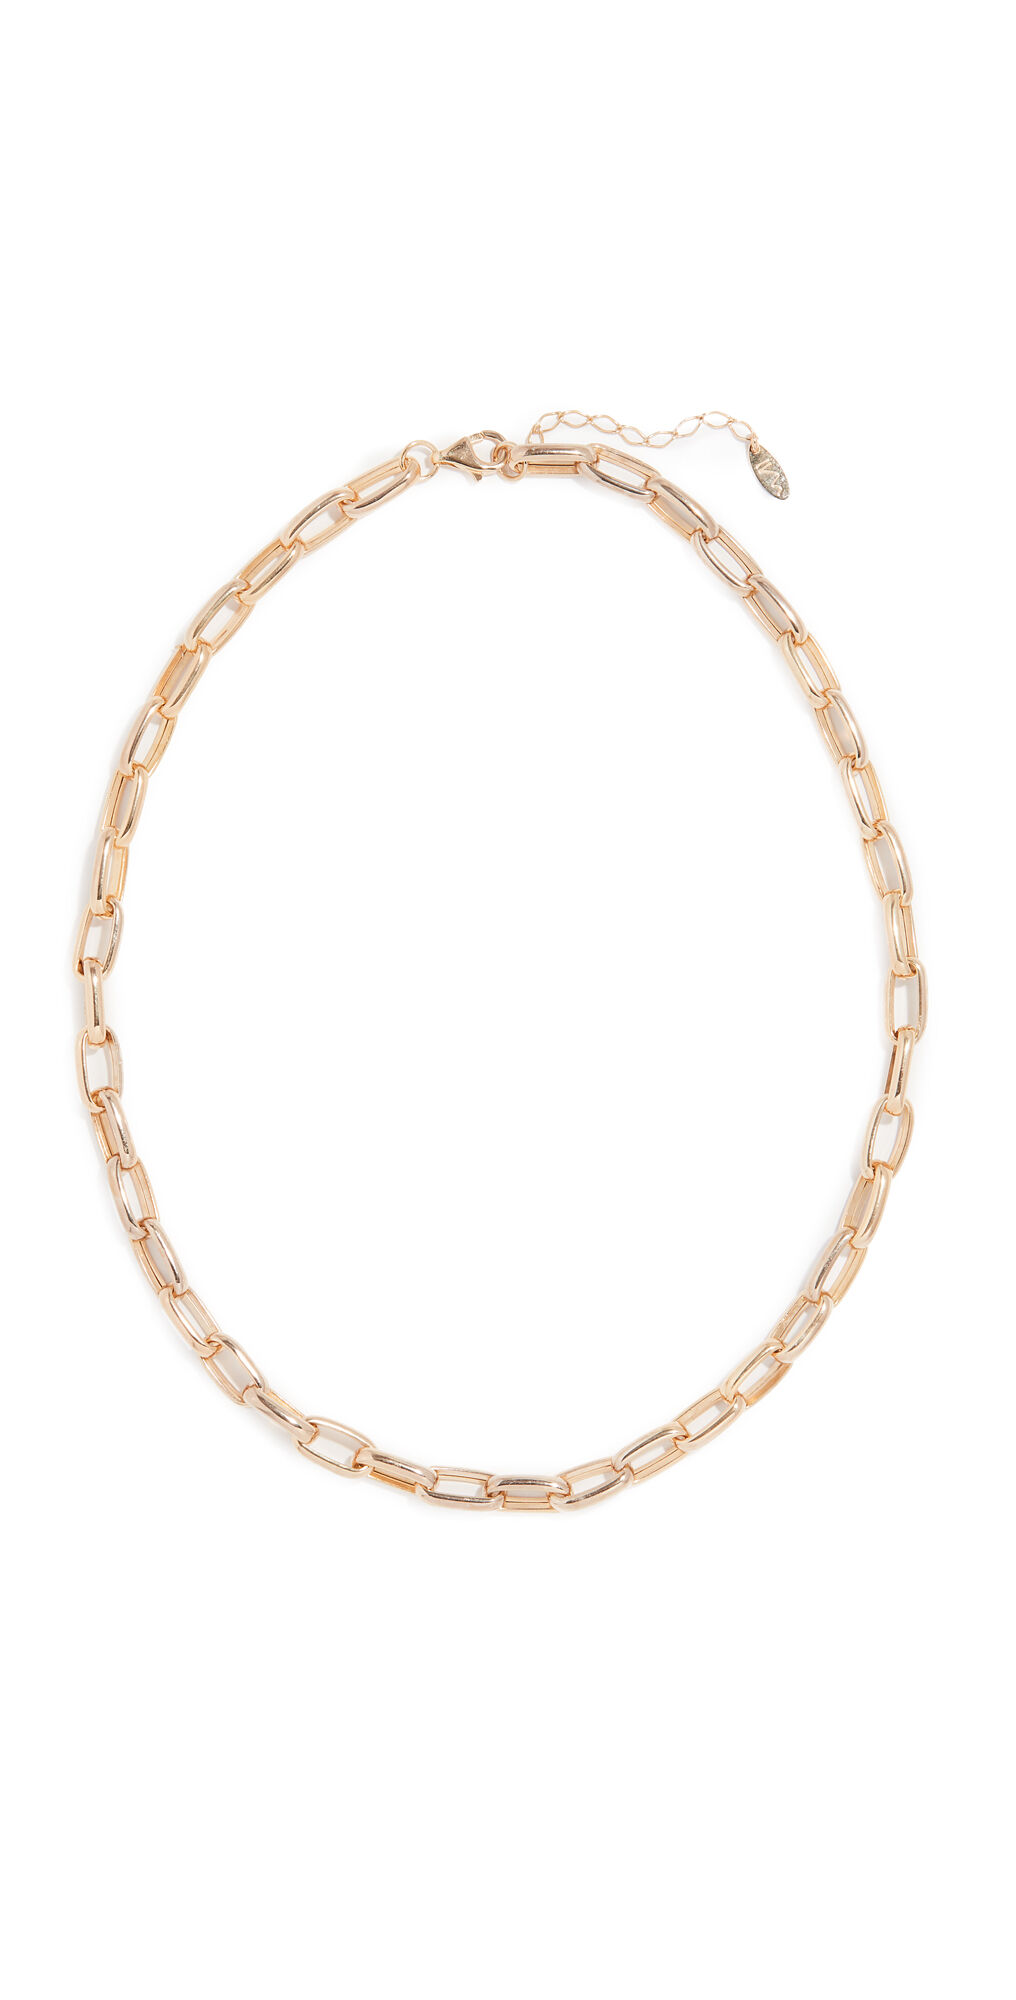 Maison Irem Chunky Chain Choker Necklace Gold One Size  Gold  size:One Size